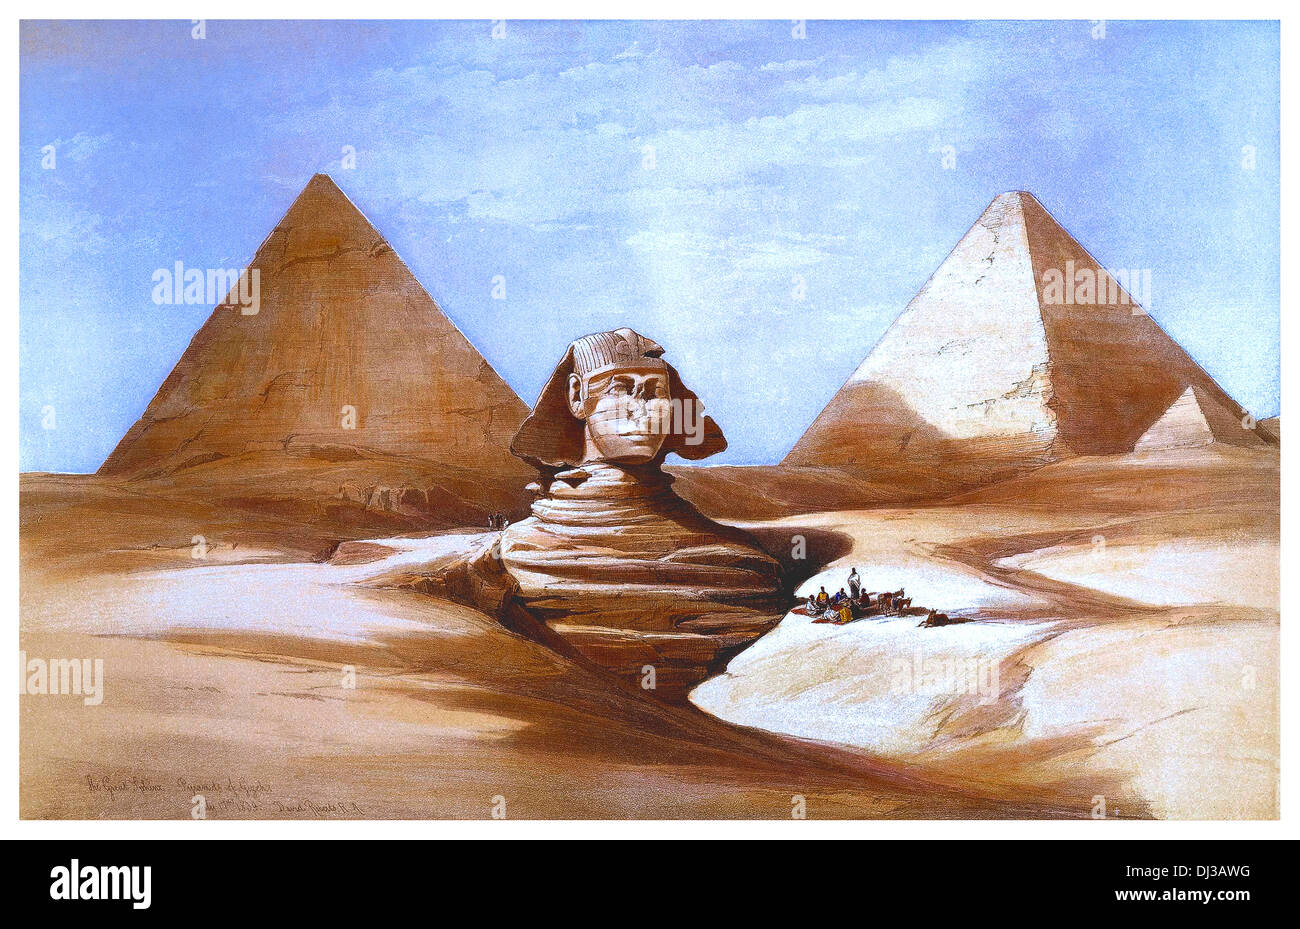 The Great Sphinx Pyramids of Giza by David Roberts 1839 Stock Photo